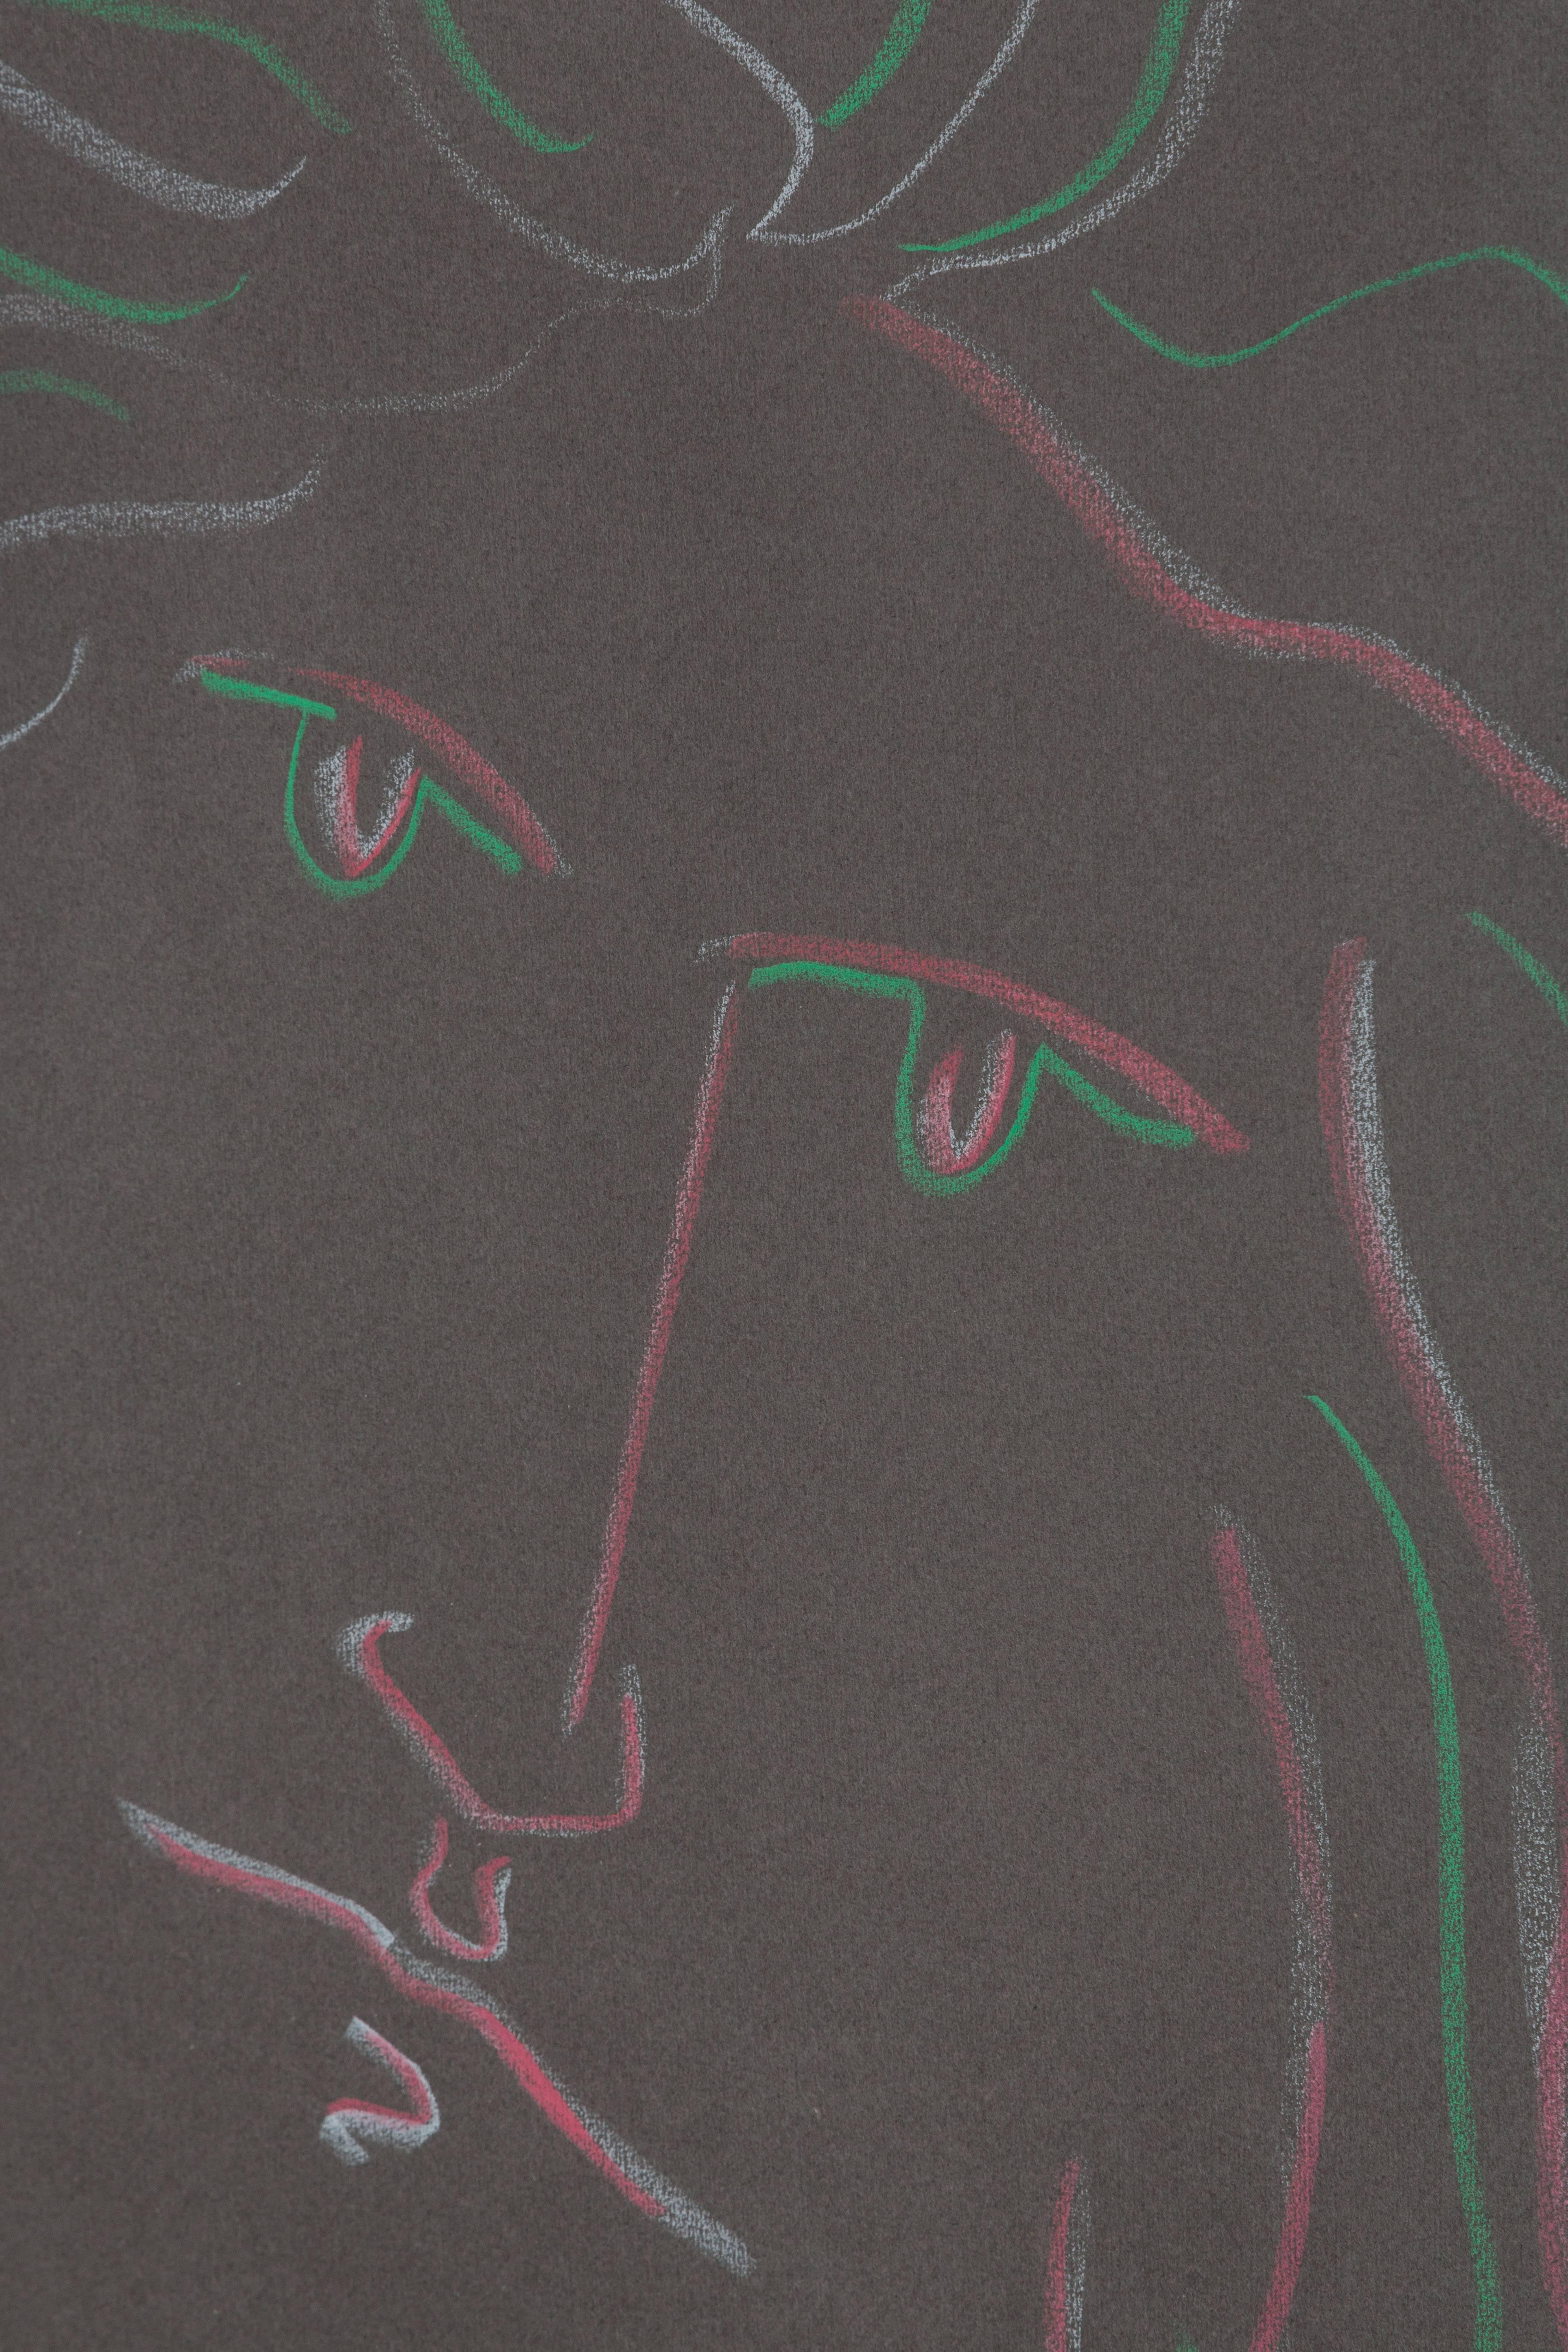 Pastel on paper attributed to Jean Cocteau.